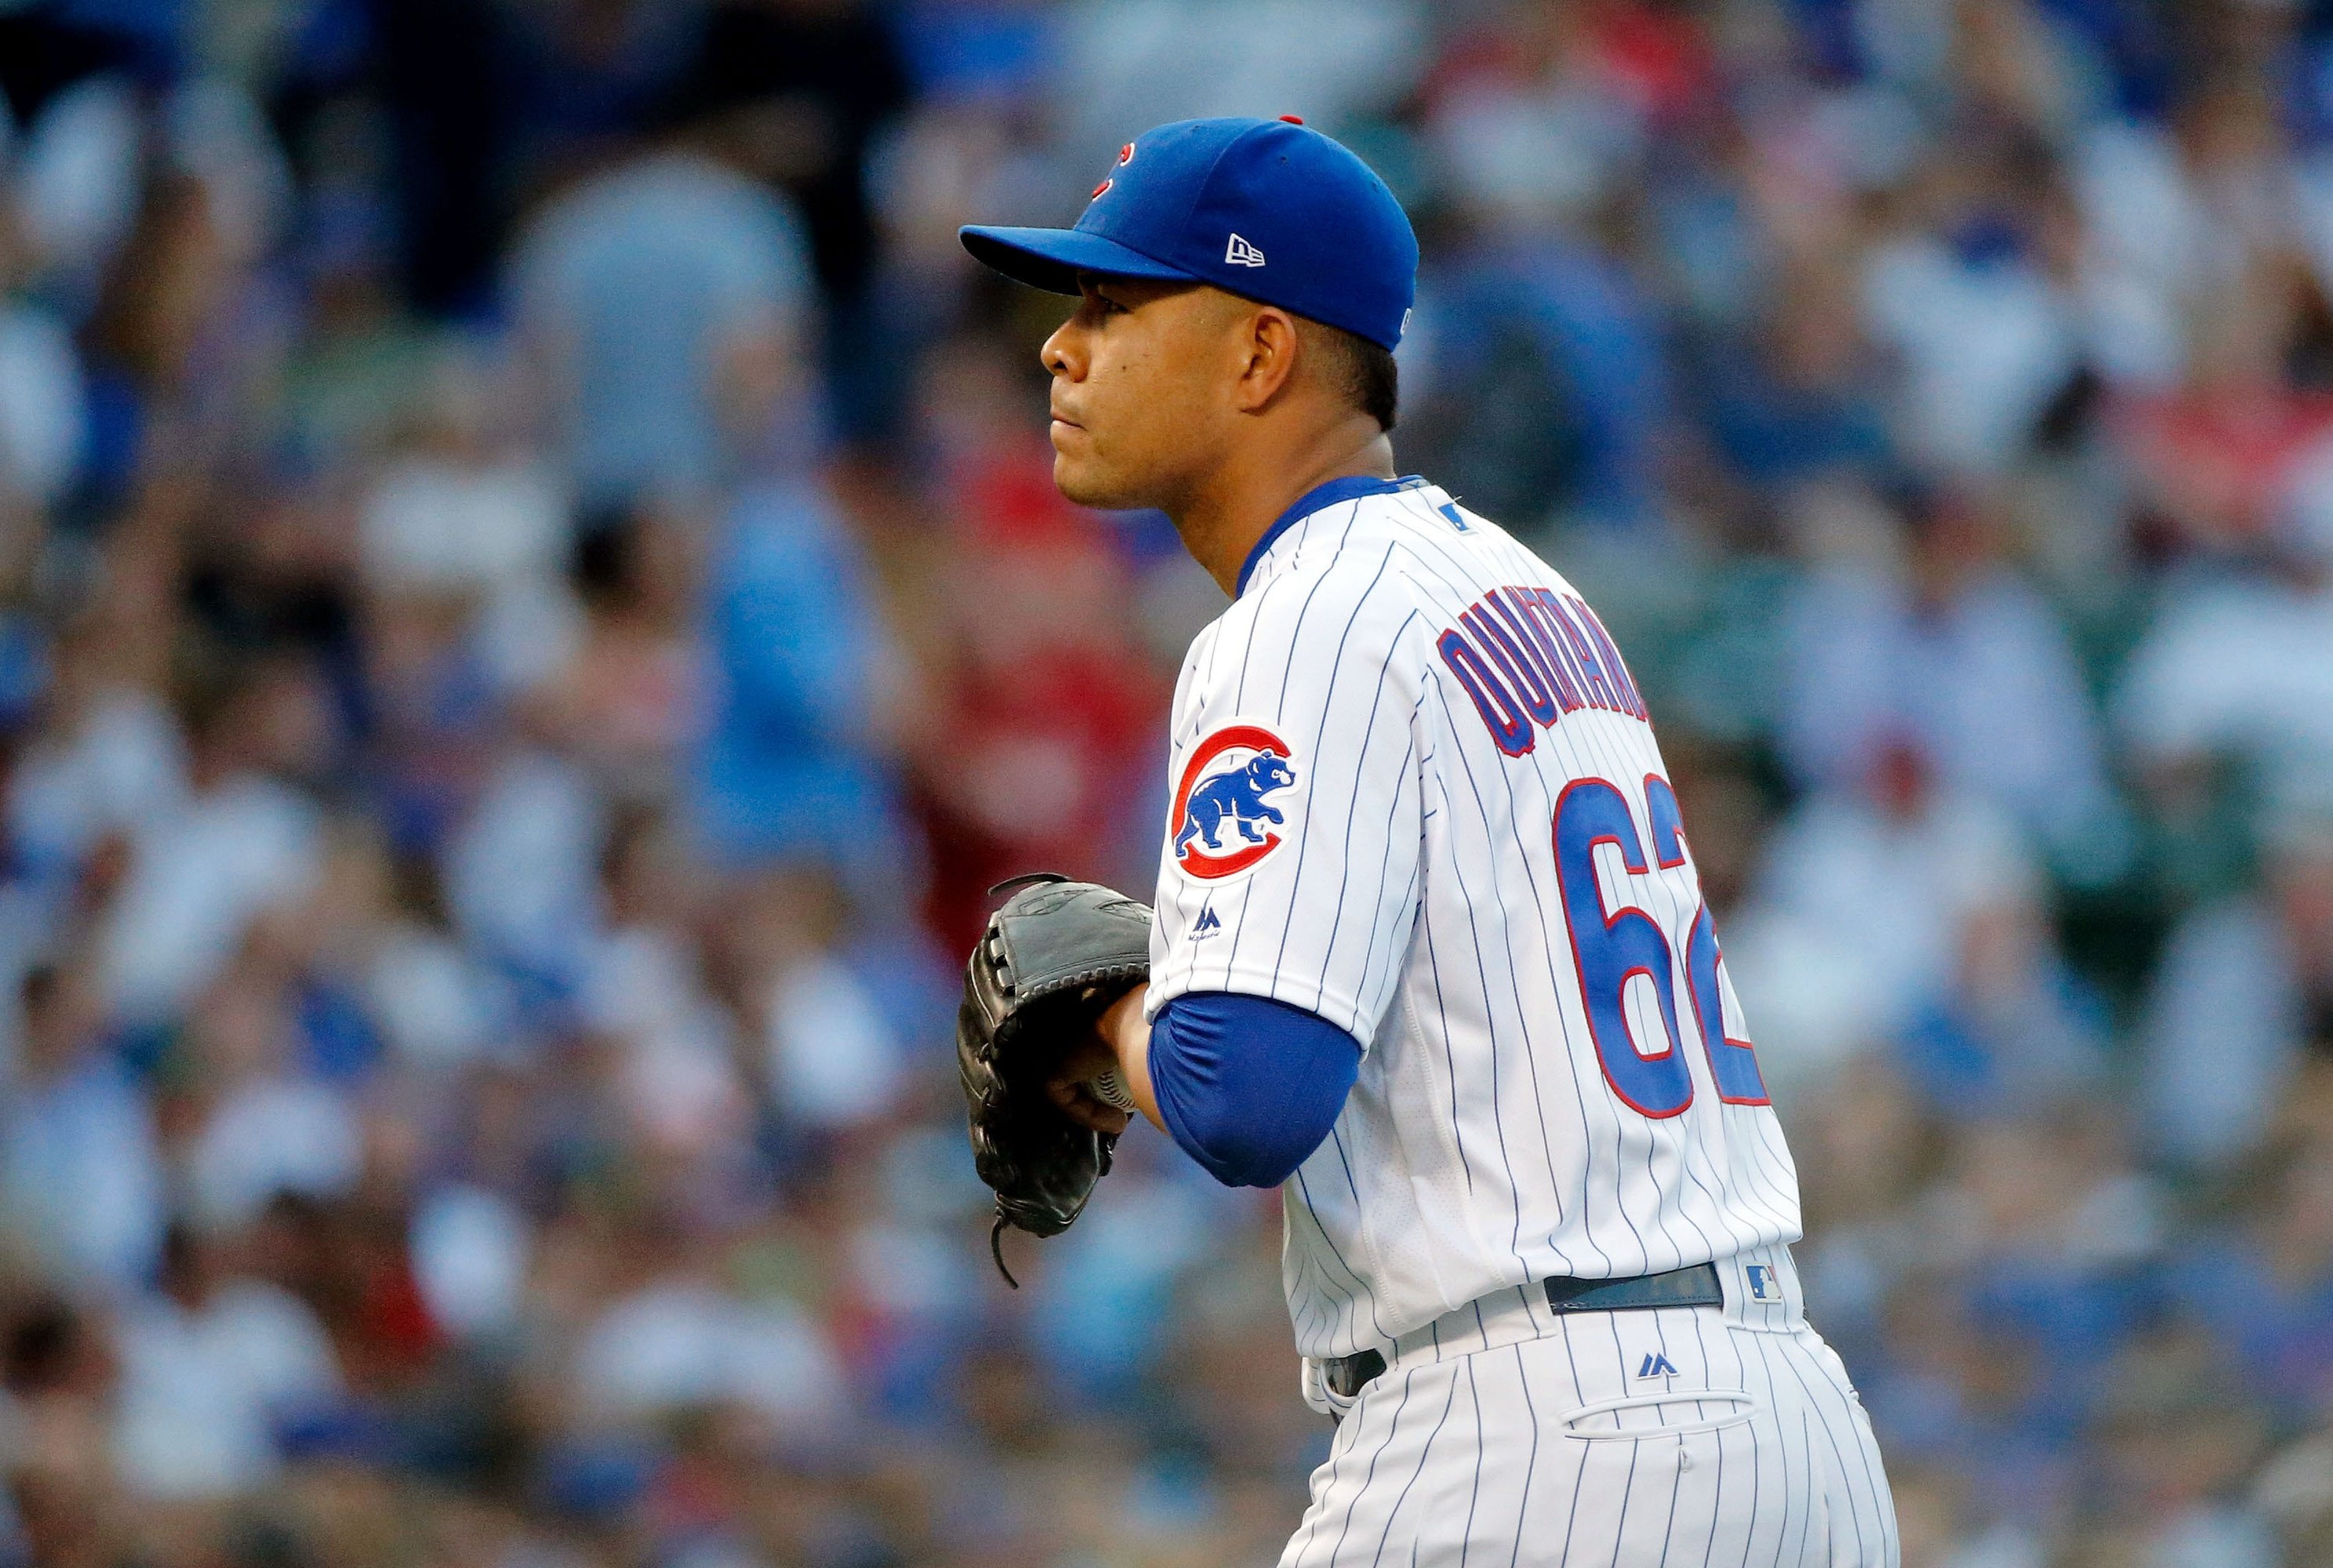 Unbelievably bad Chicago Cubs trade proposed by Bleacher Report